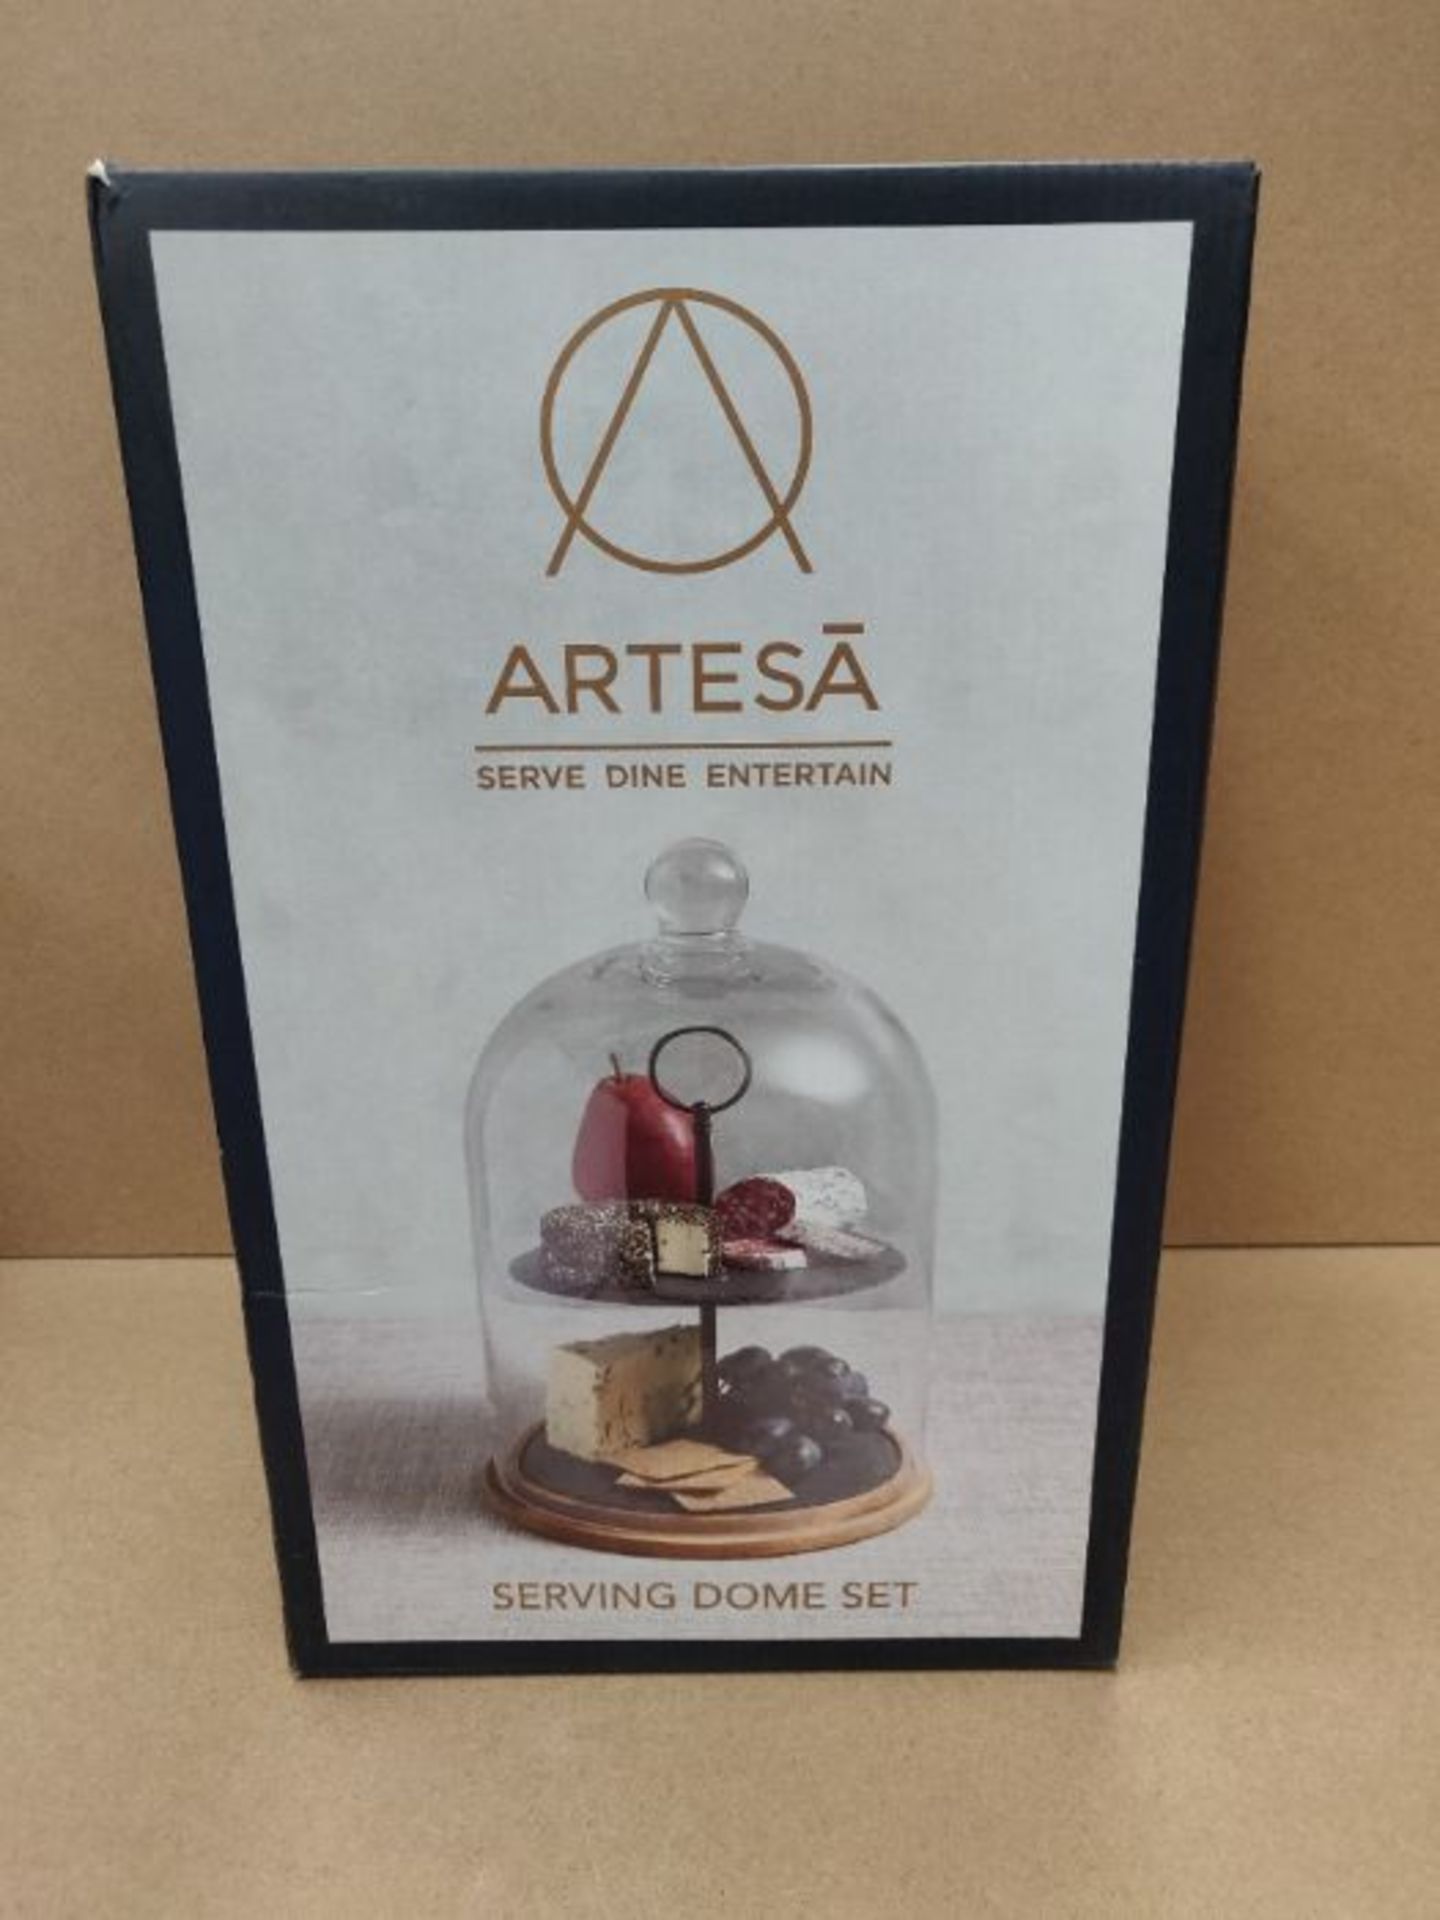 [INCOMPLETE] [CRACKED] Artesa 2-Tier Serving Stand/Cake Dome, 22 x 31 cm - Image 2 of 3